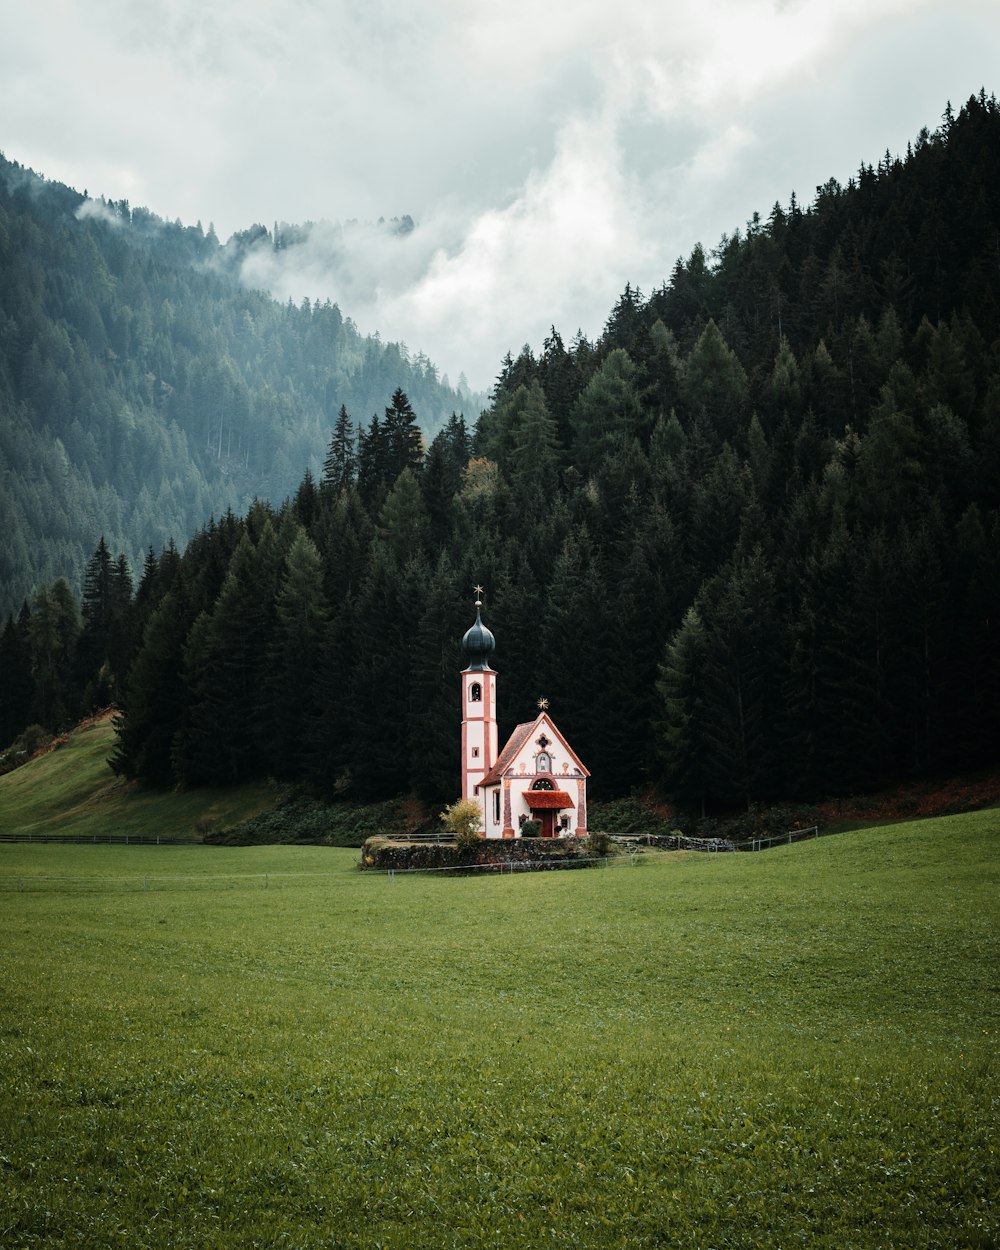 a church in the middle of a field with trees in the background